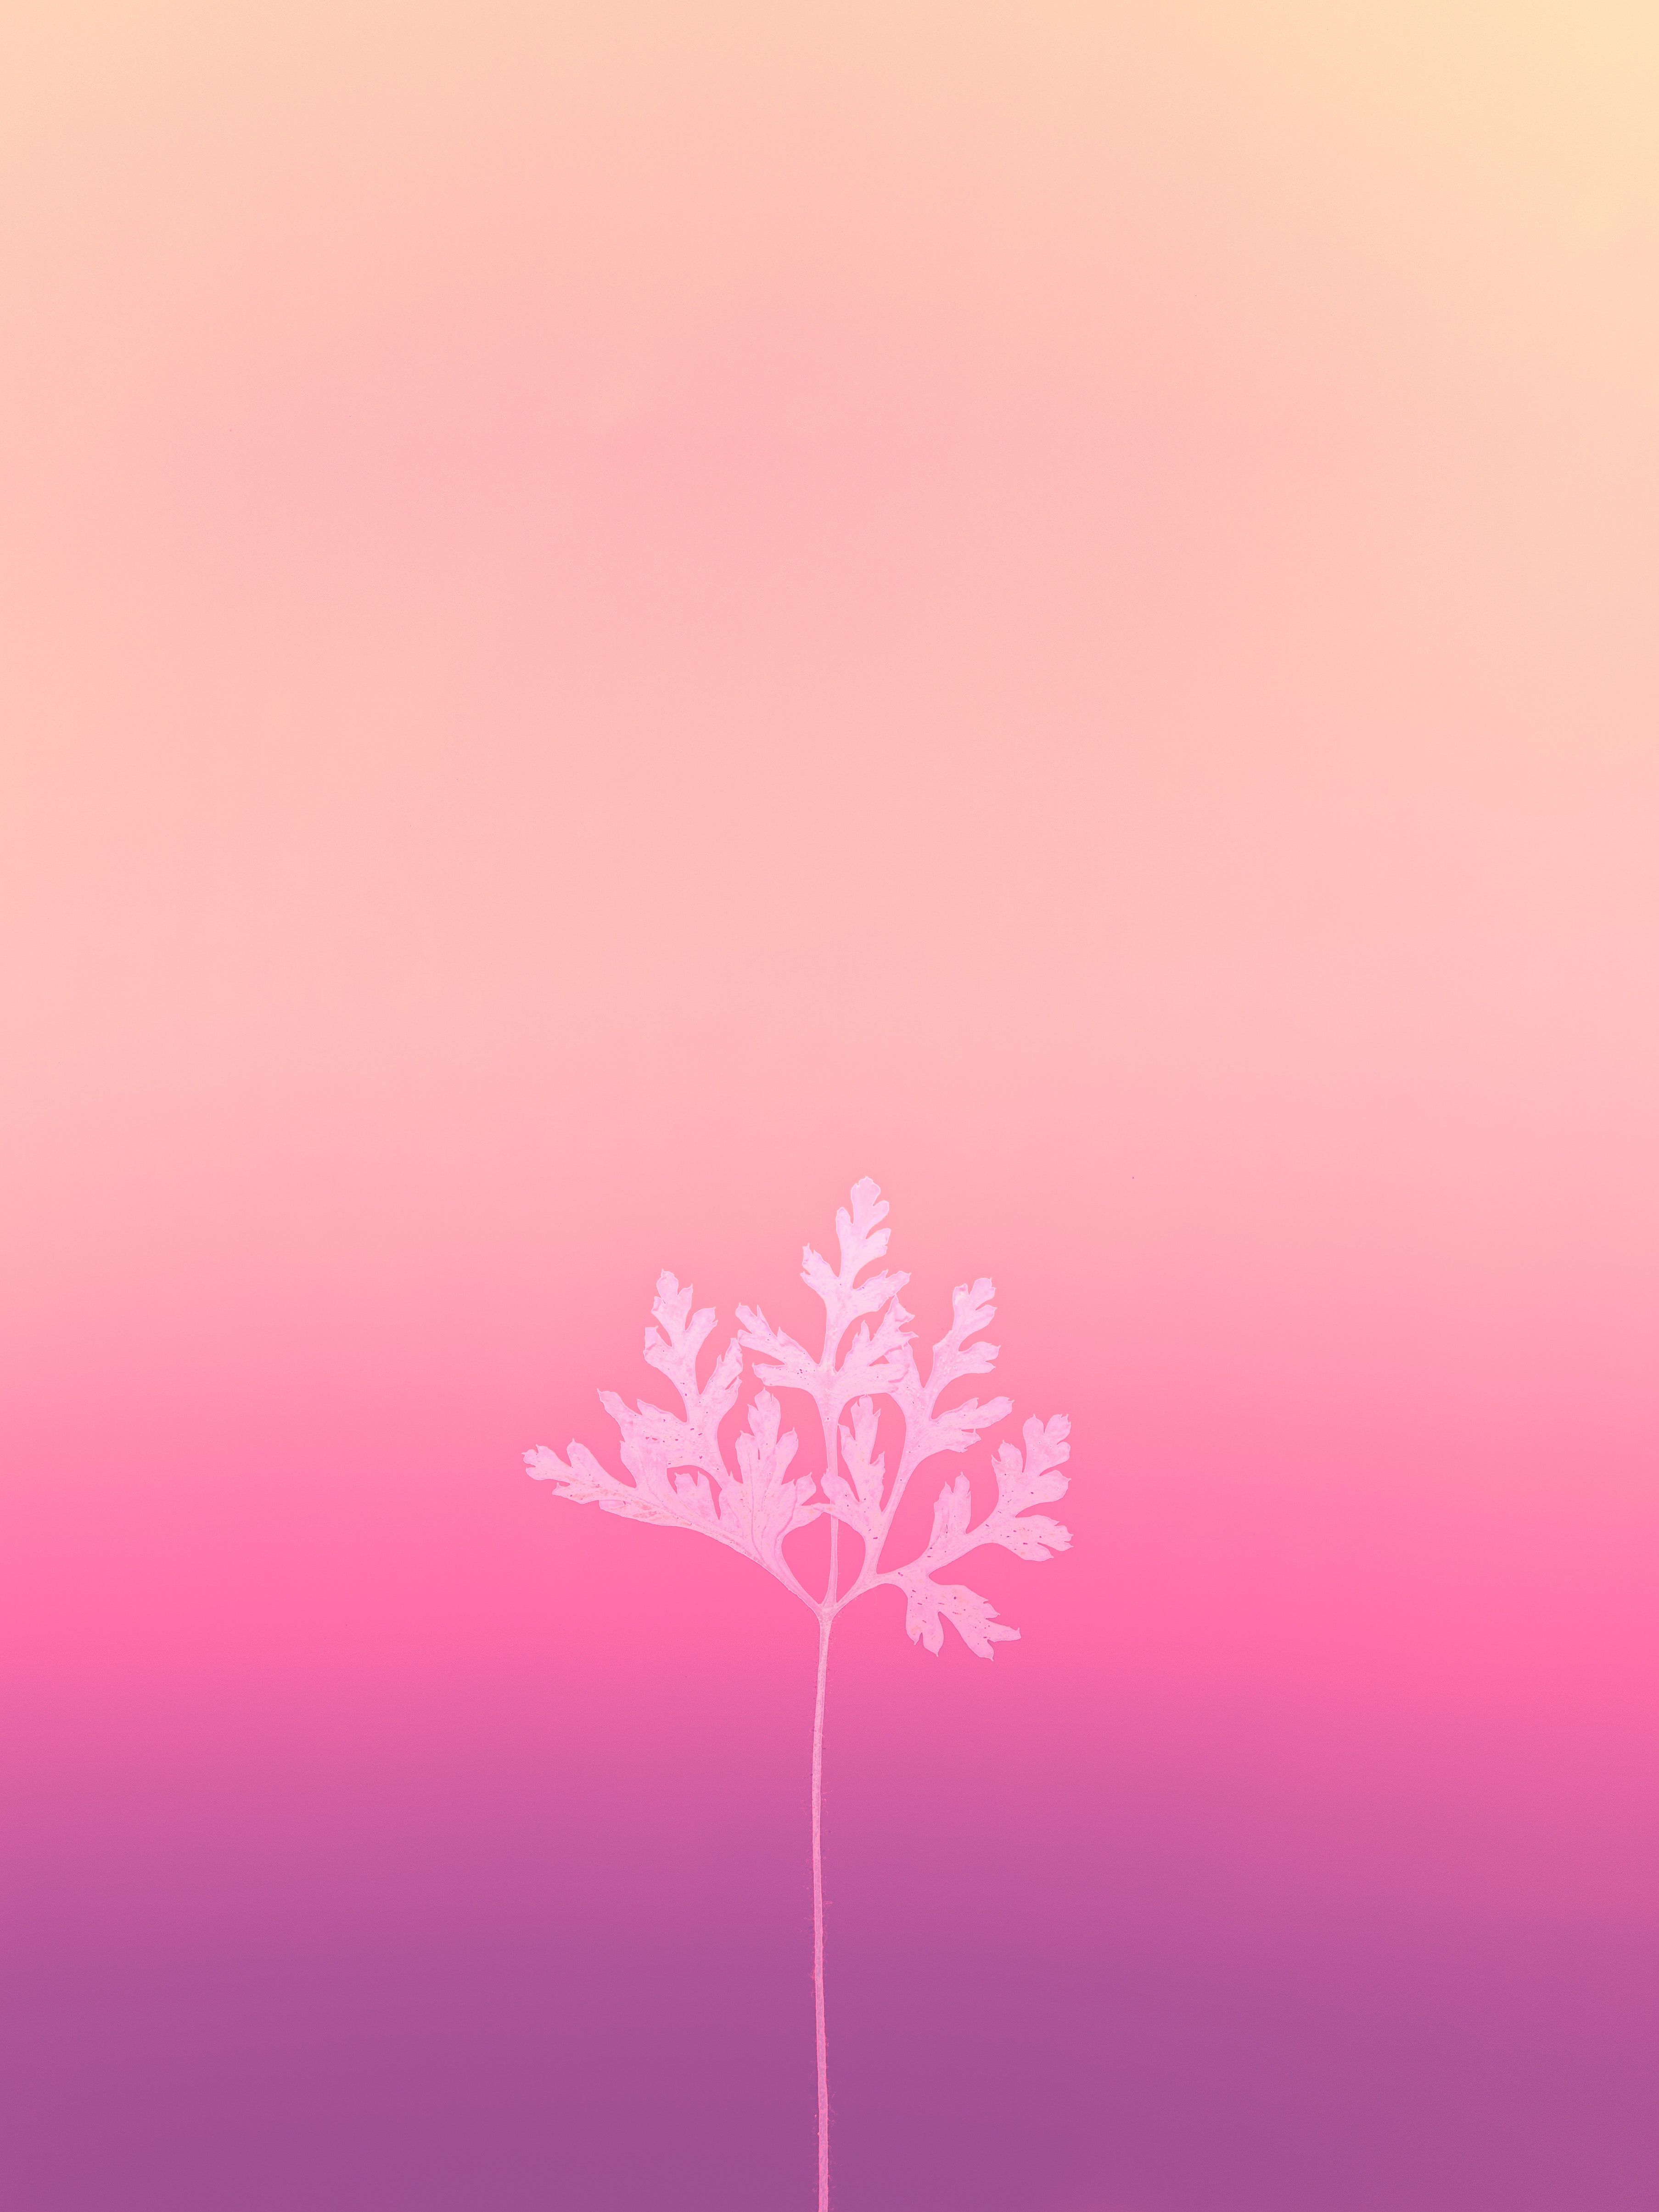 A plant on a gradient background - Pink